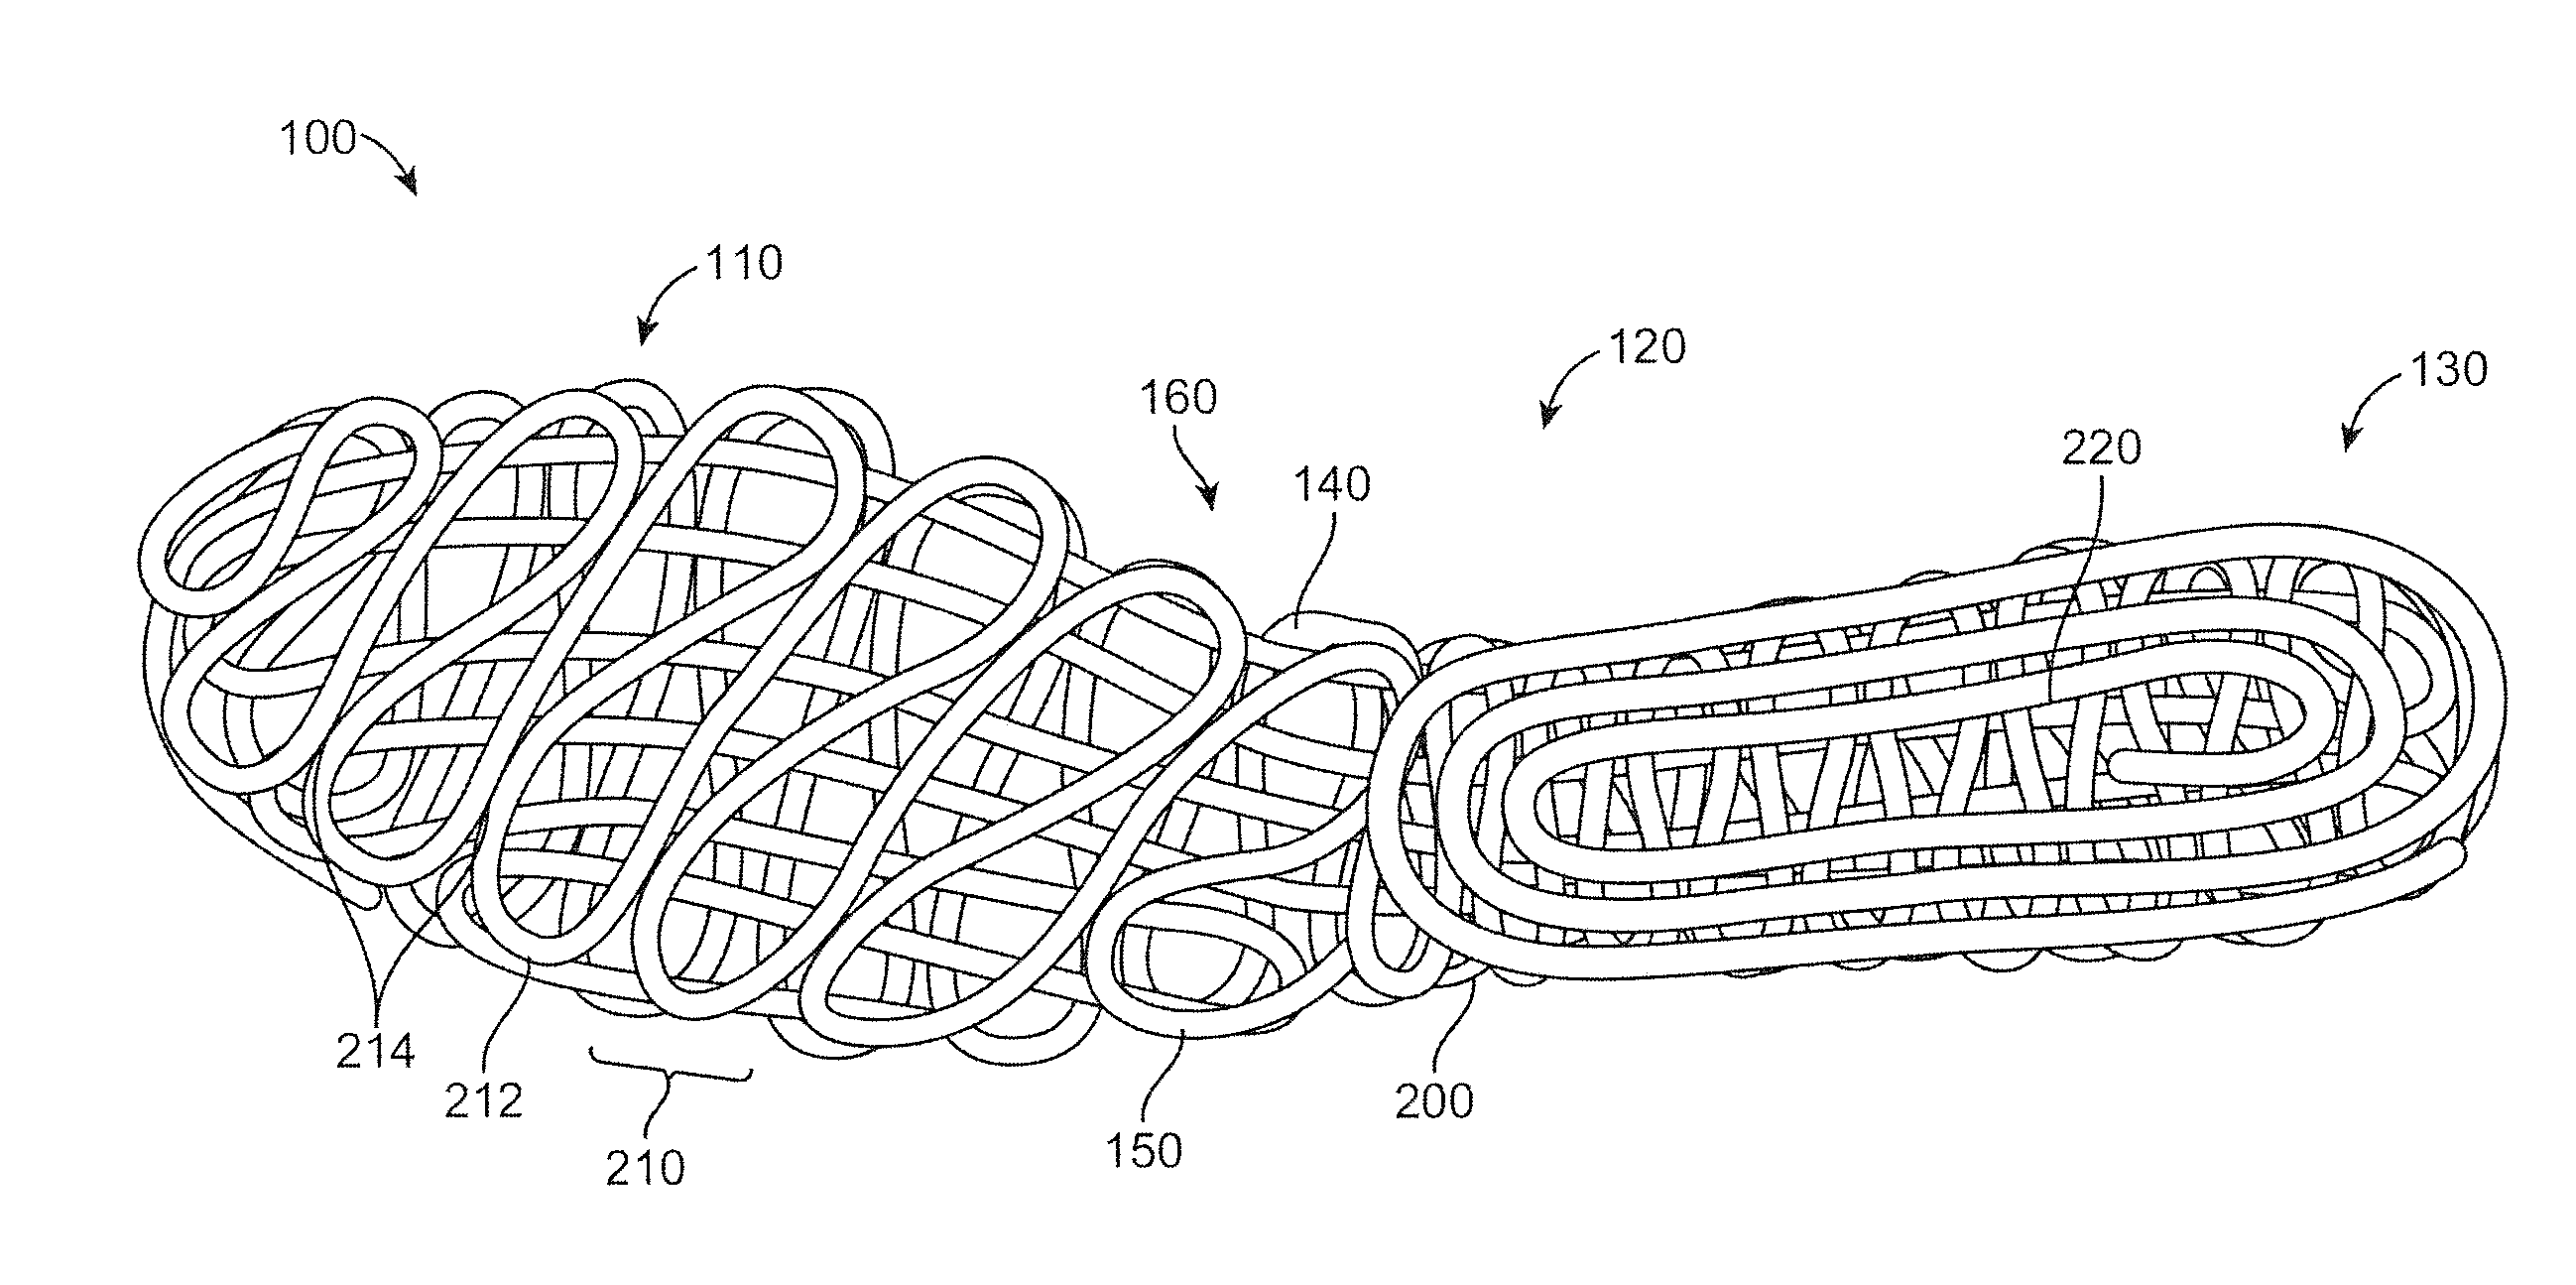 Article Of Footwear With Extruded Components